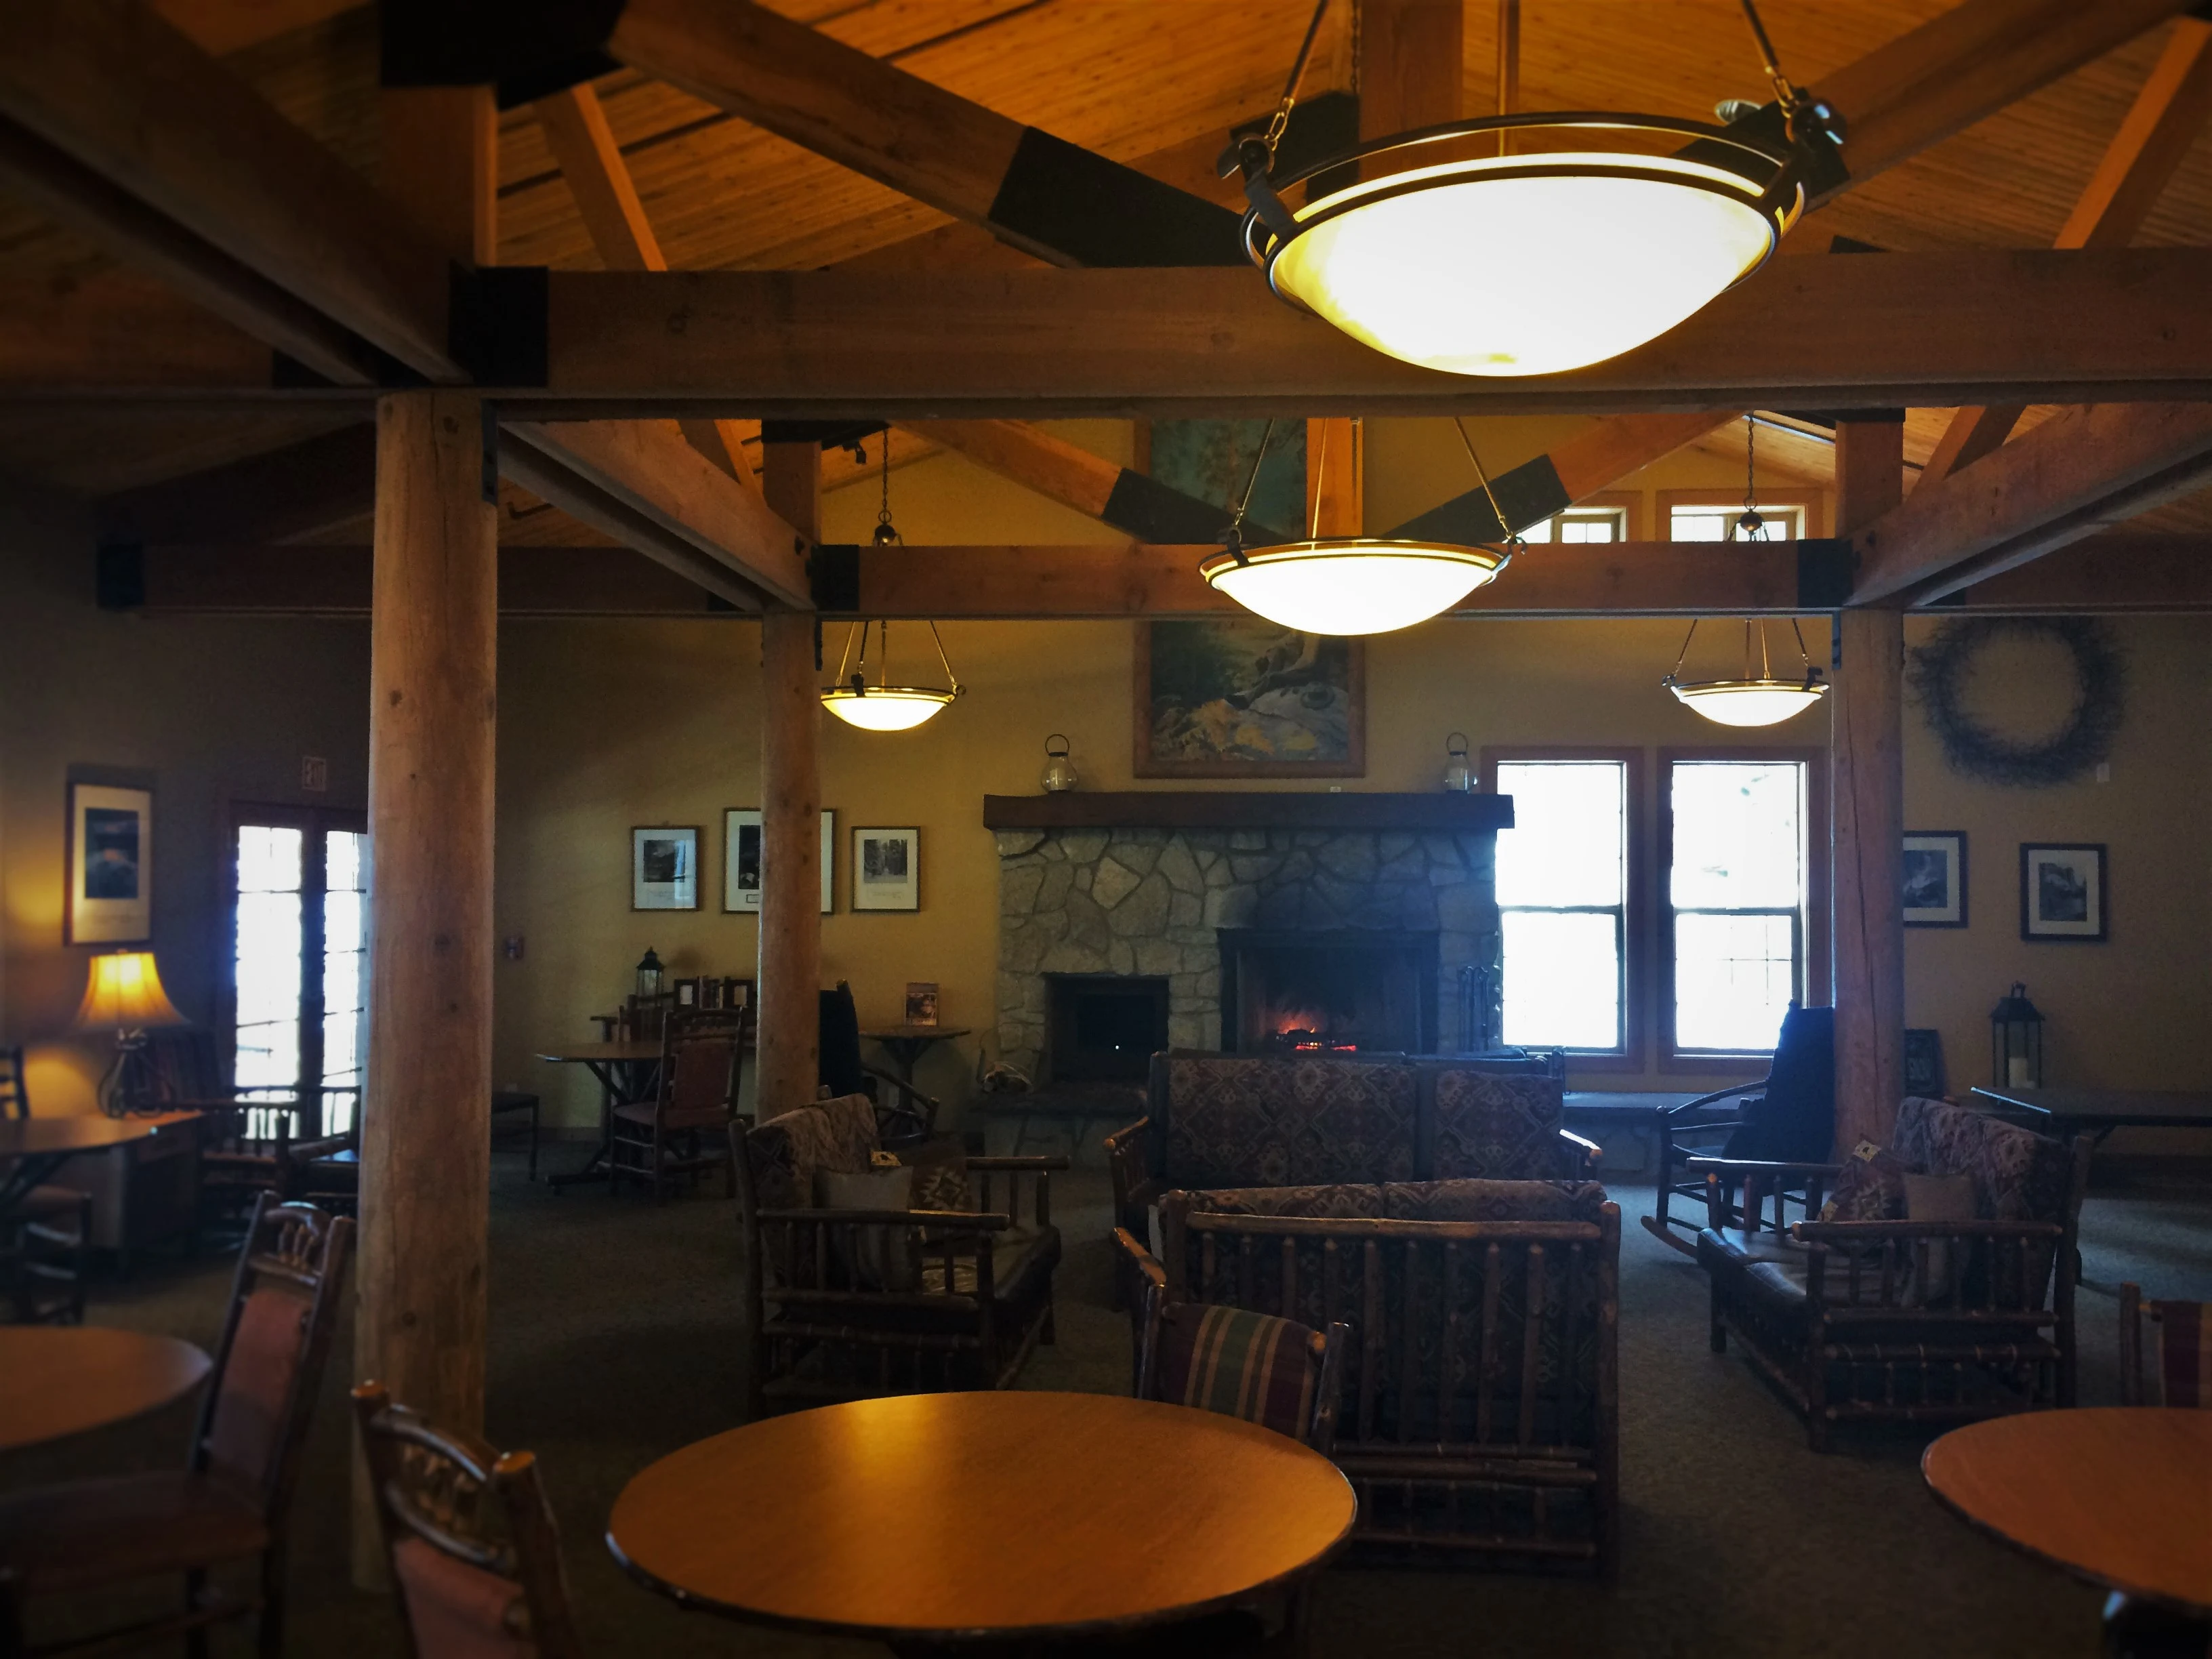 Lobby in John Muir Lodge in Kings Canyon National Park 1